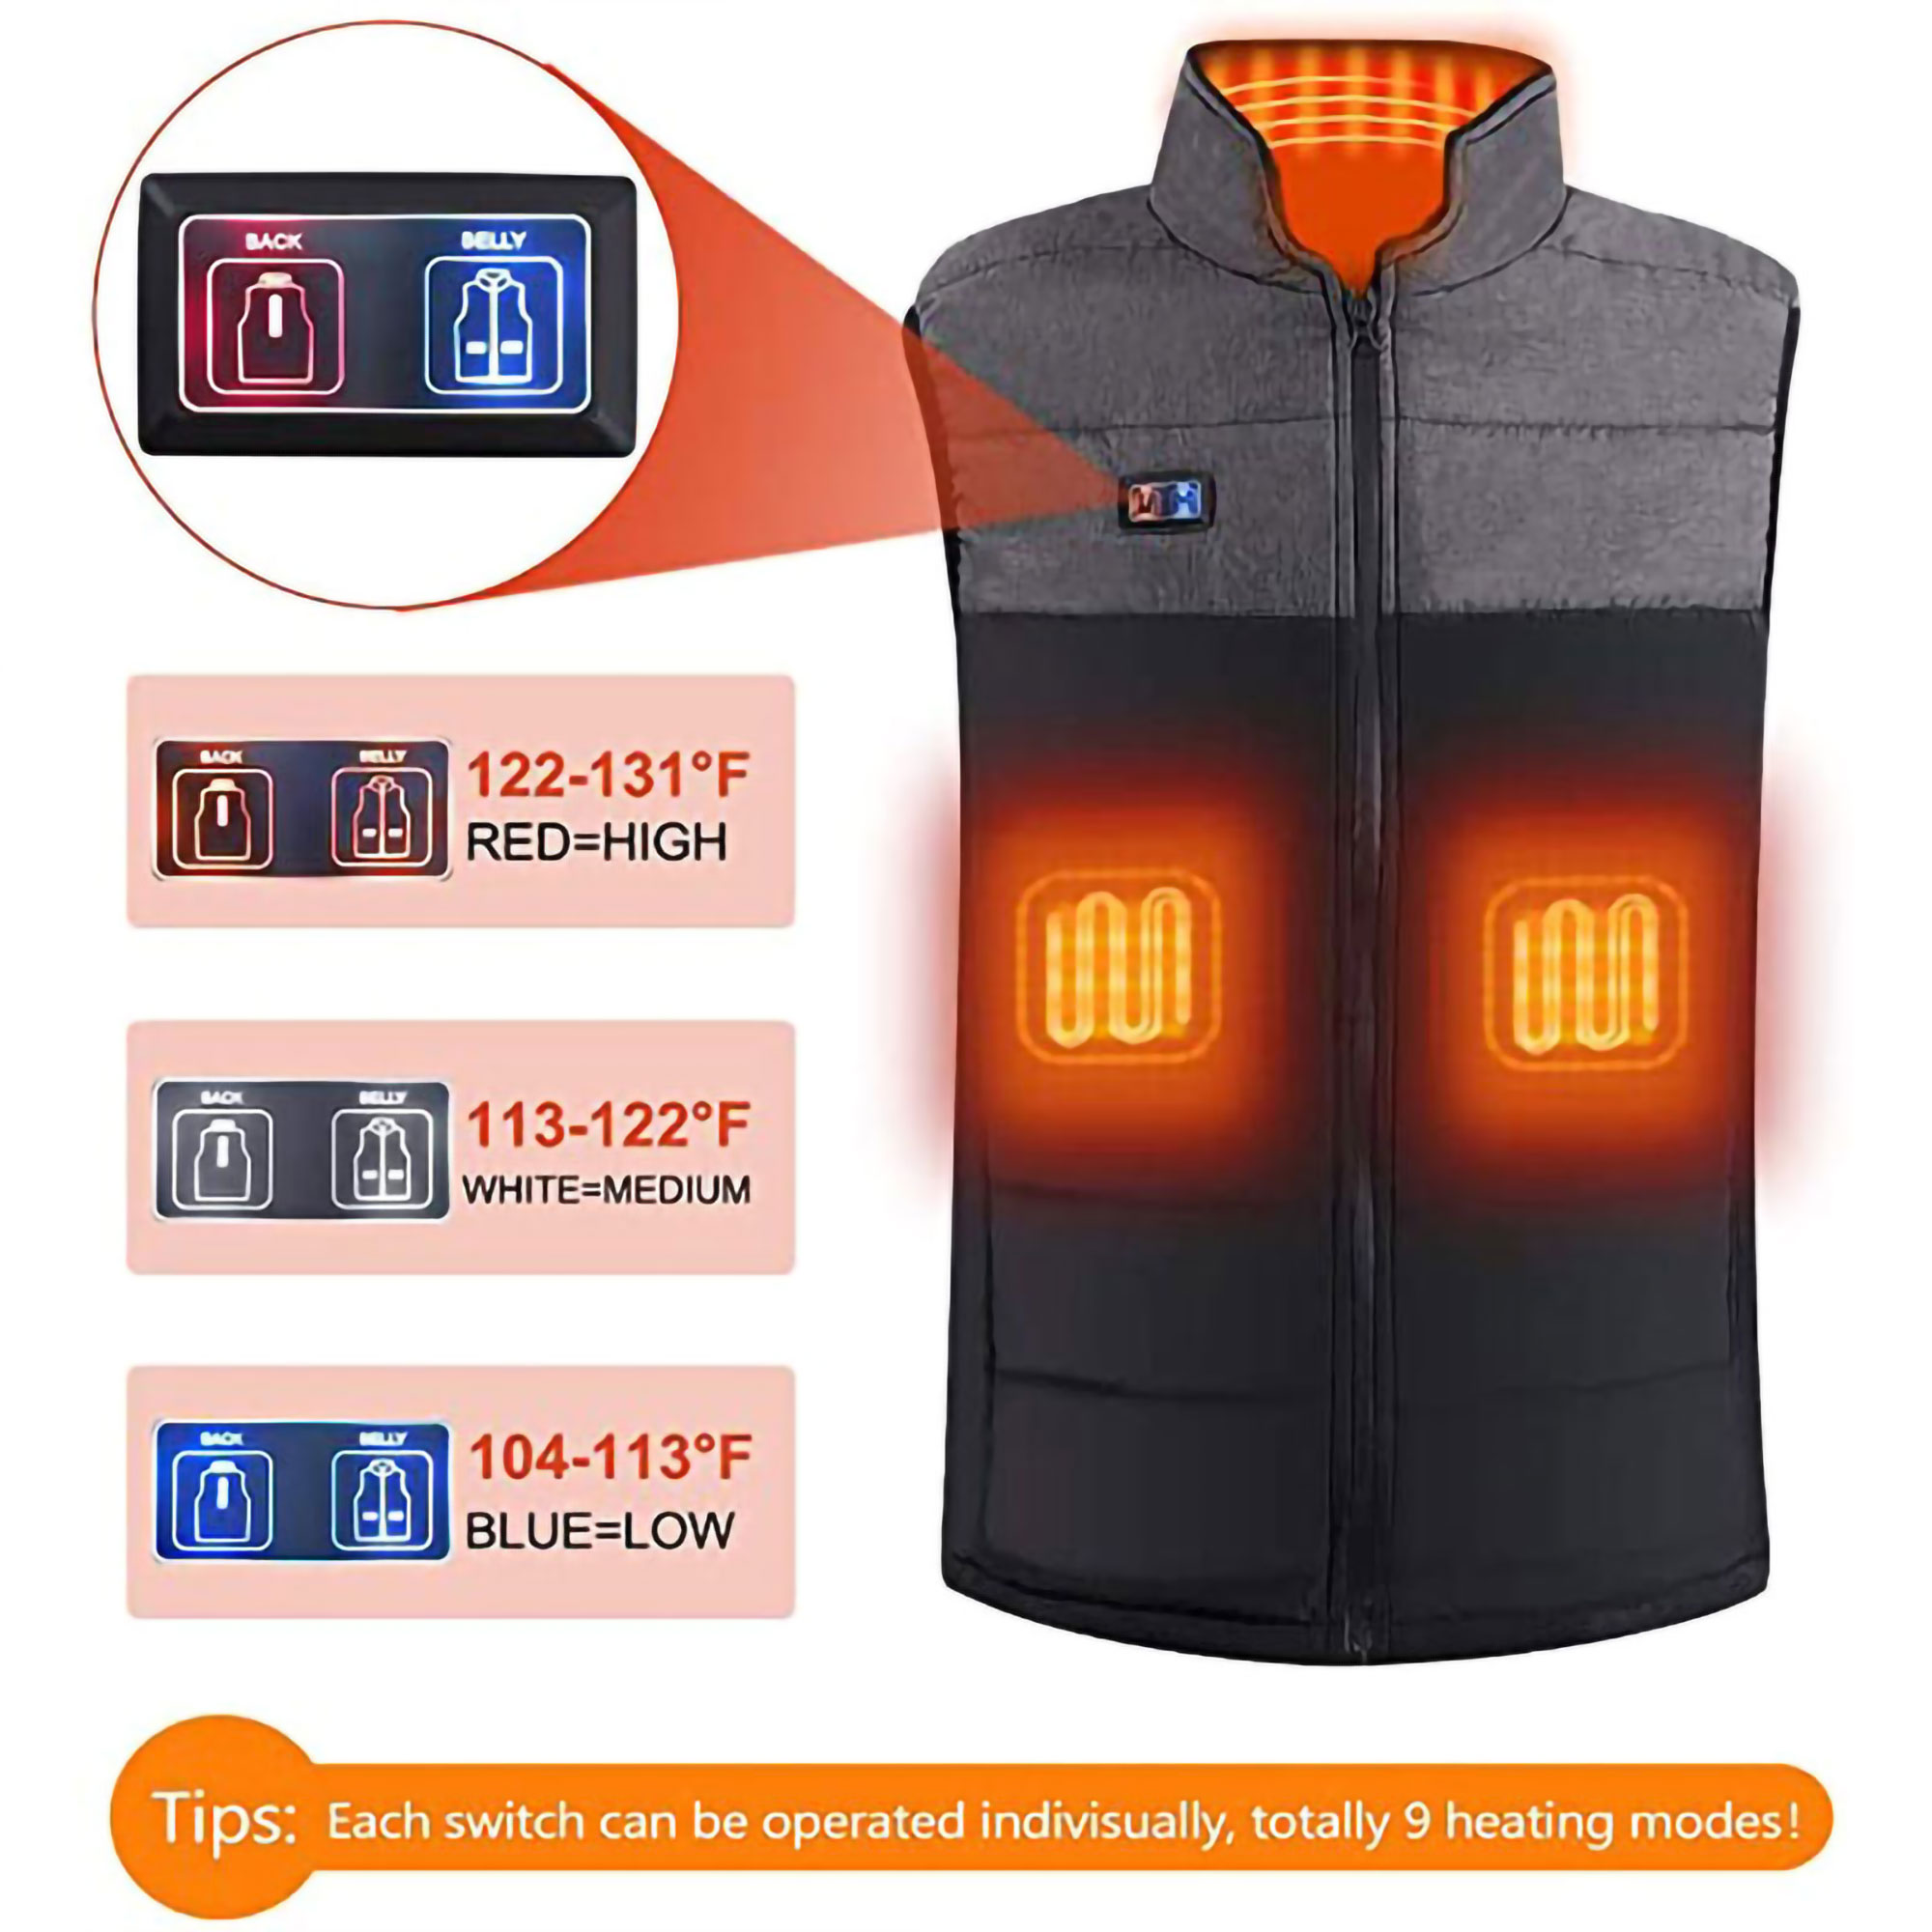 Sexy Dance Electric Heated Vest for Men Women Heating Jacket Sleeveless Zipper Coat Lightweight Thermal Outwear With 10000mHA Power Bank - image 4 of 11